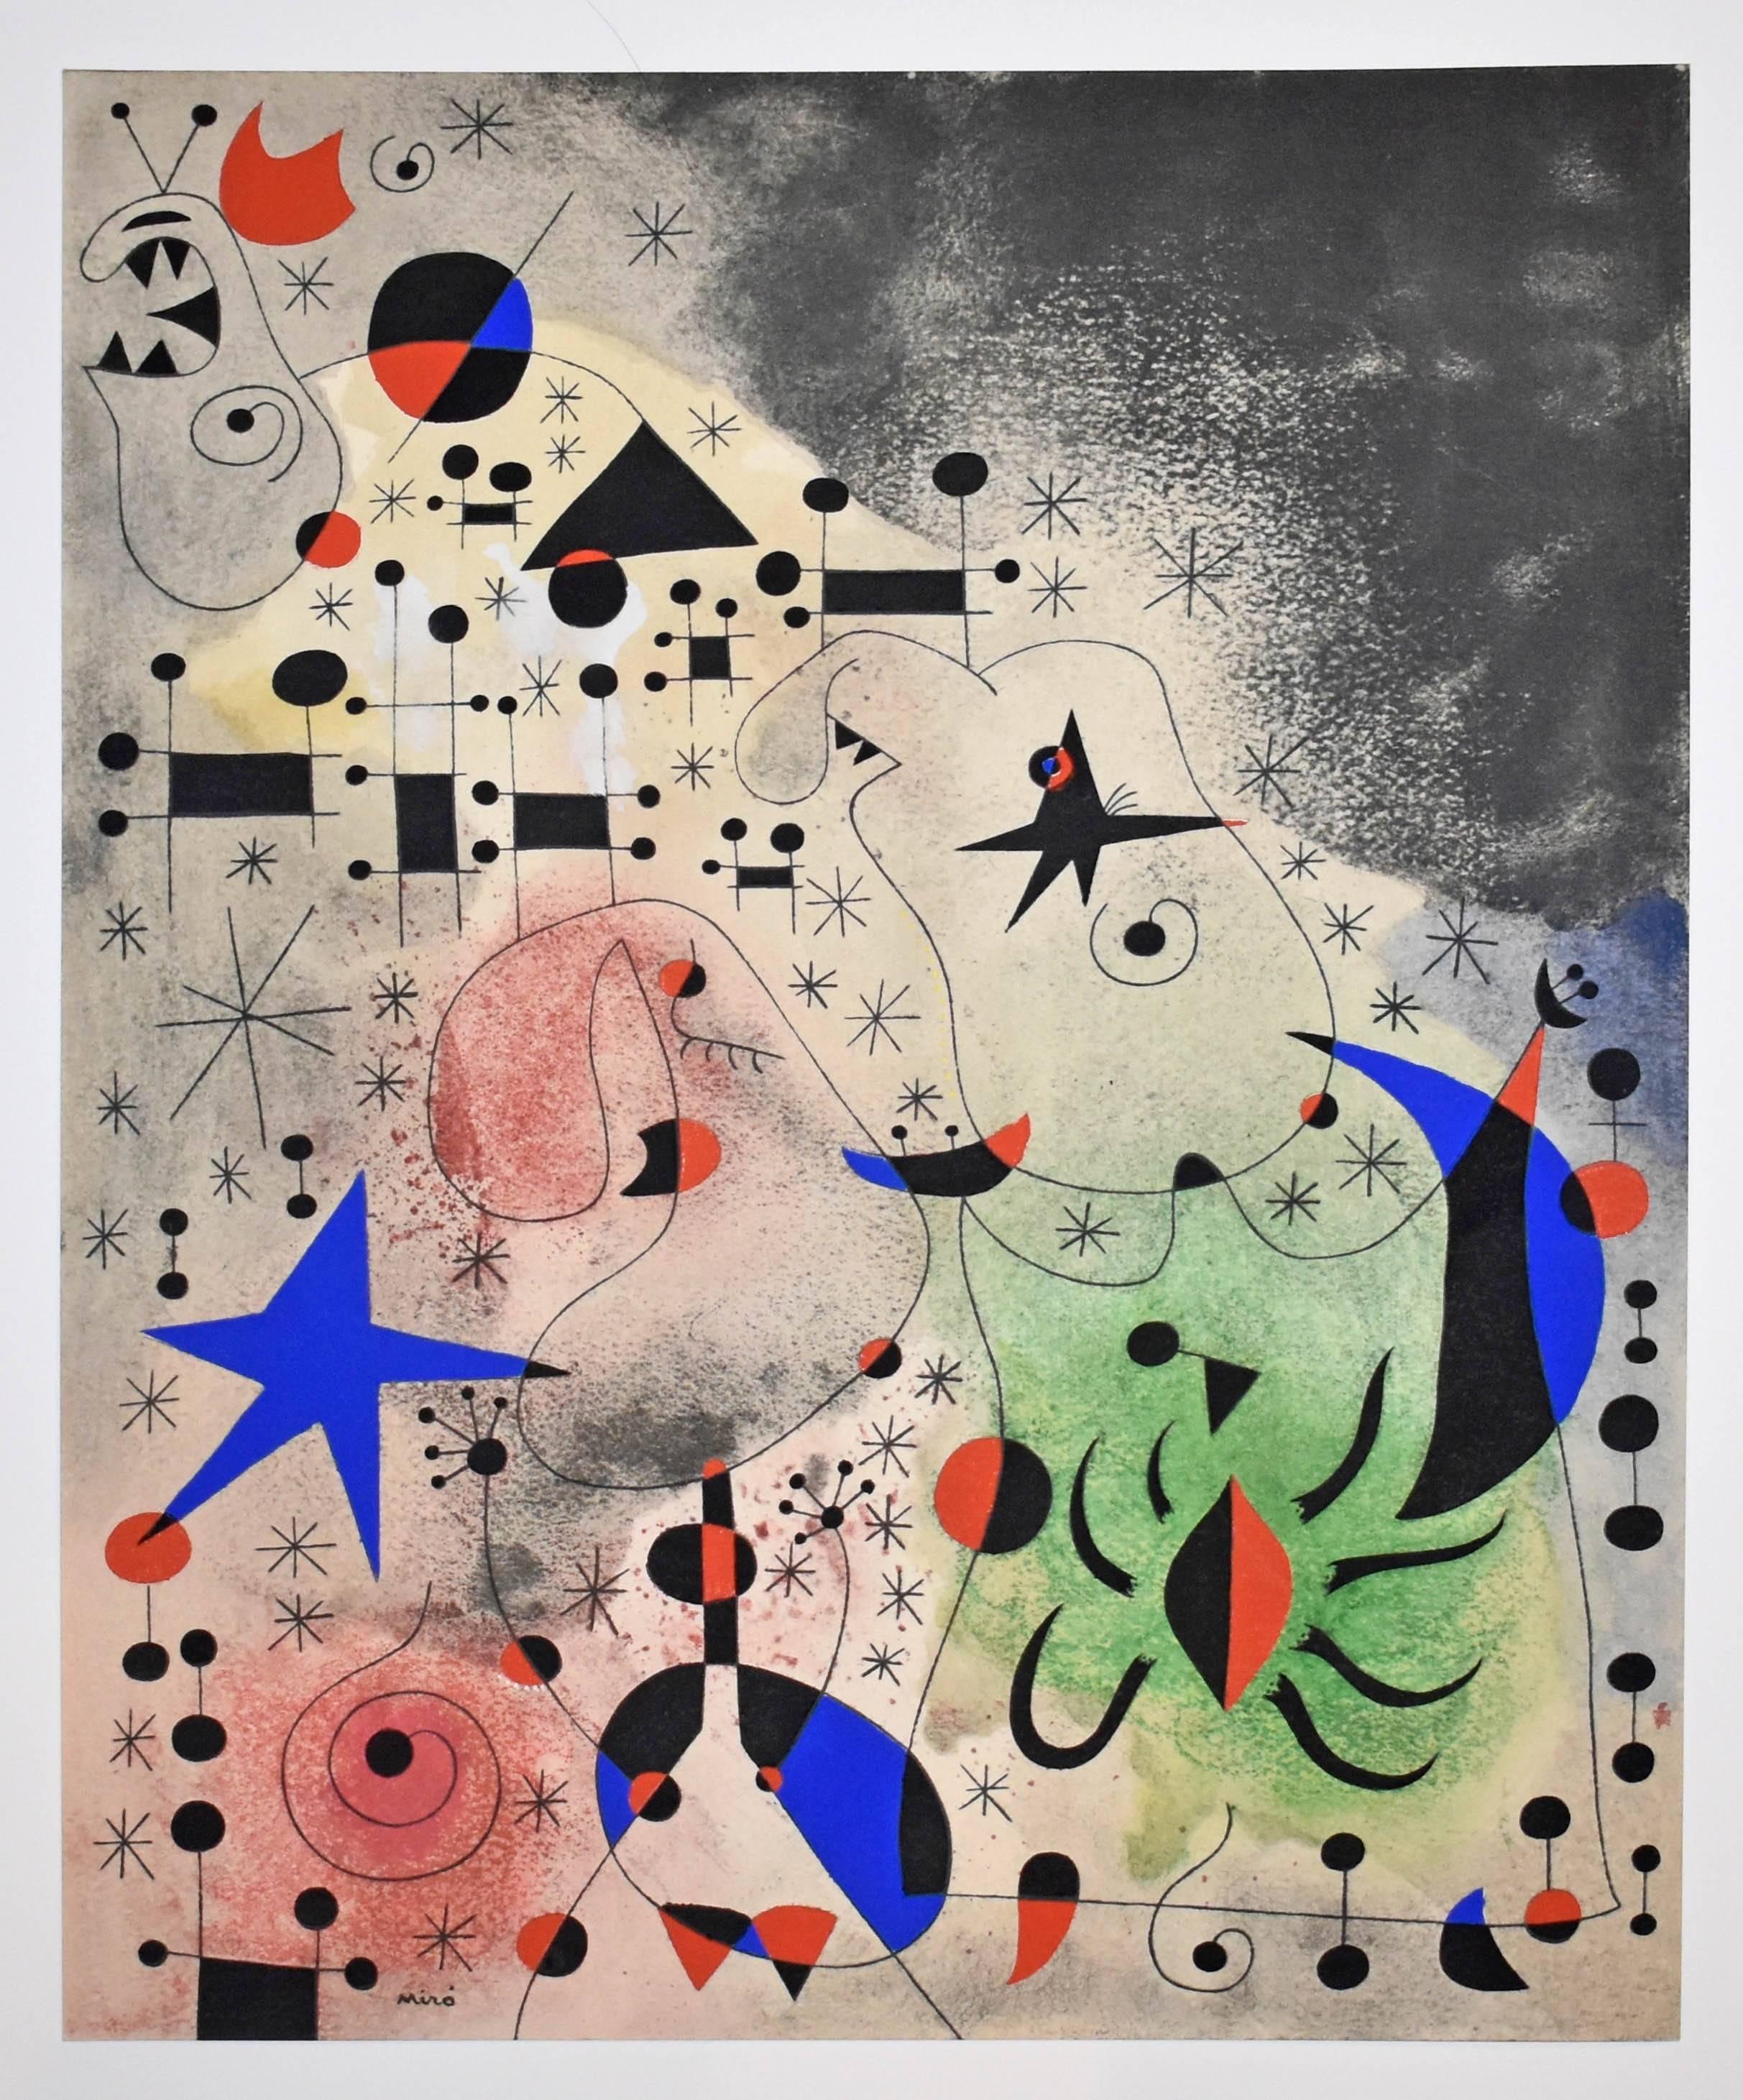 L'oiseau migrateur (The Migratory Bird), Plate XVIII, from Constellations - Print by (after) Joan Miró